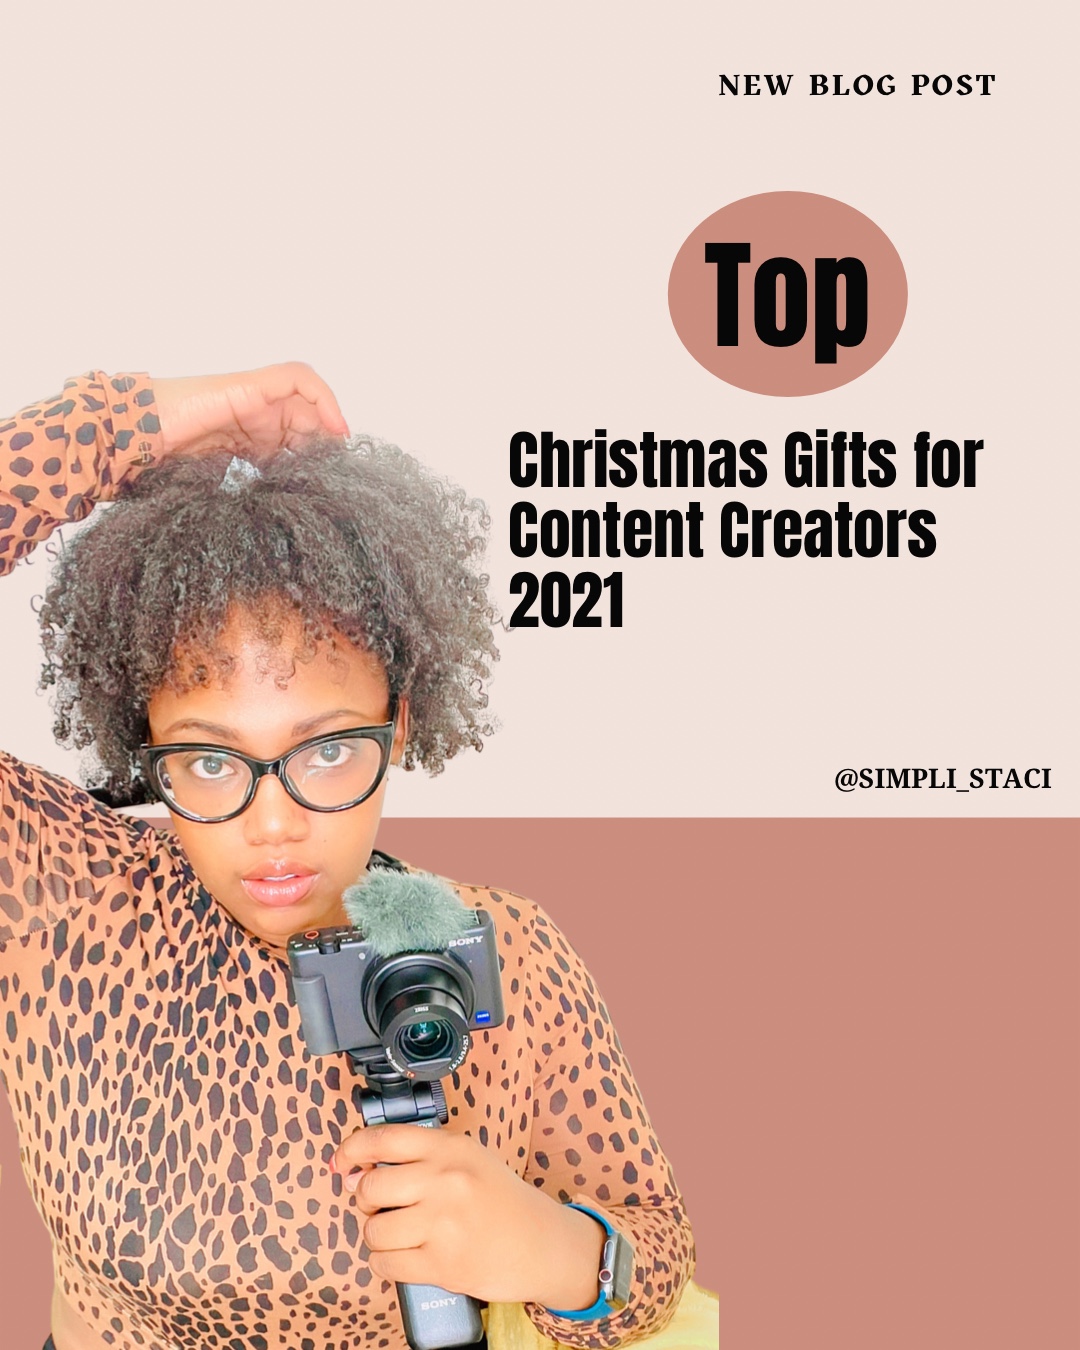 Christmas Gift Ideas for Content Creators